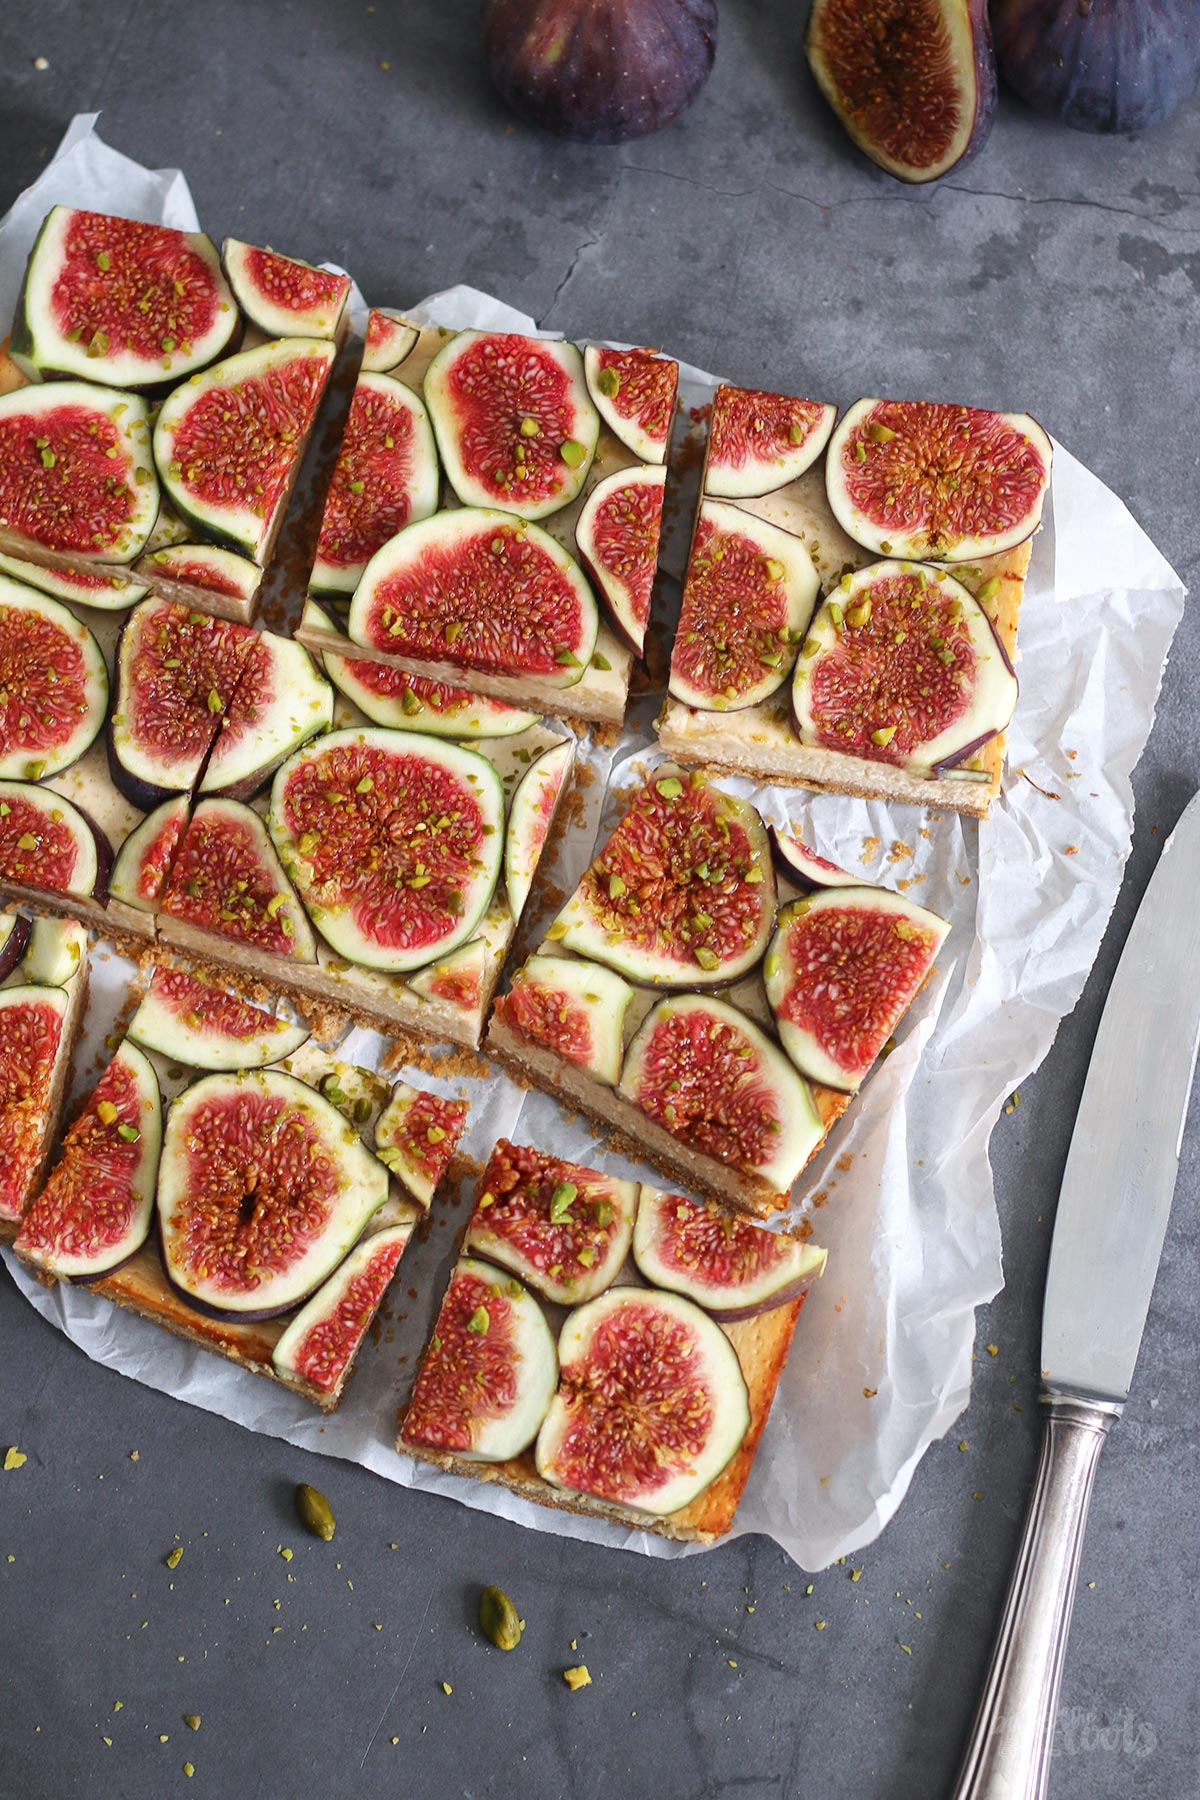 Honey Fig Cheesecake Bars | Bake to the roots